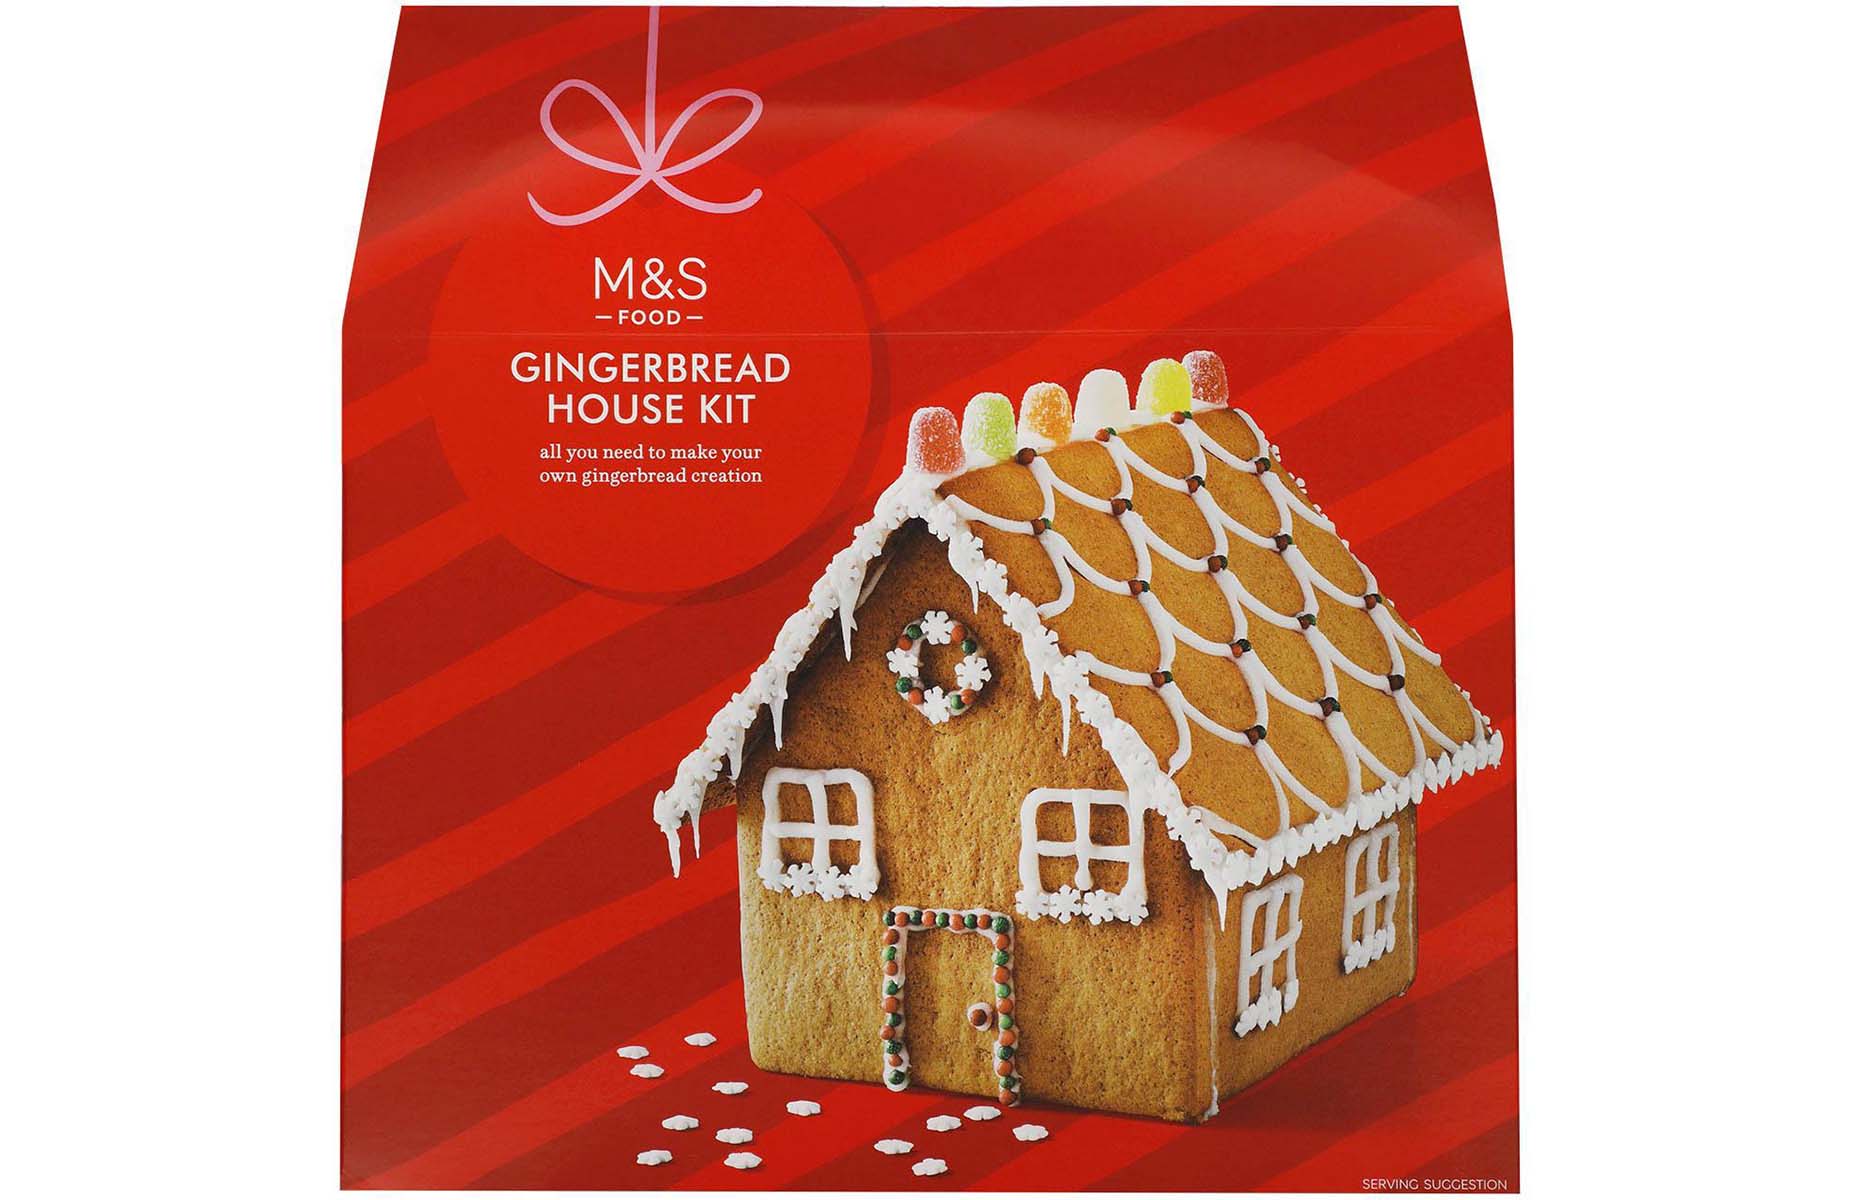 M&S gingerbread house kit 2021